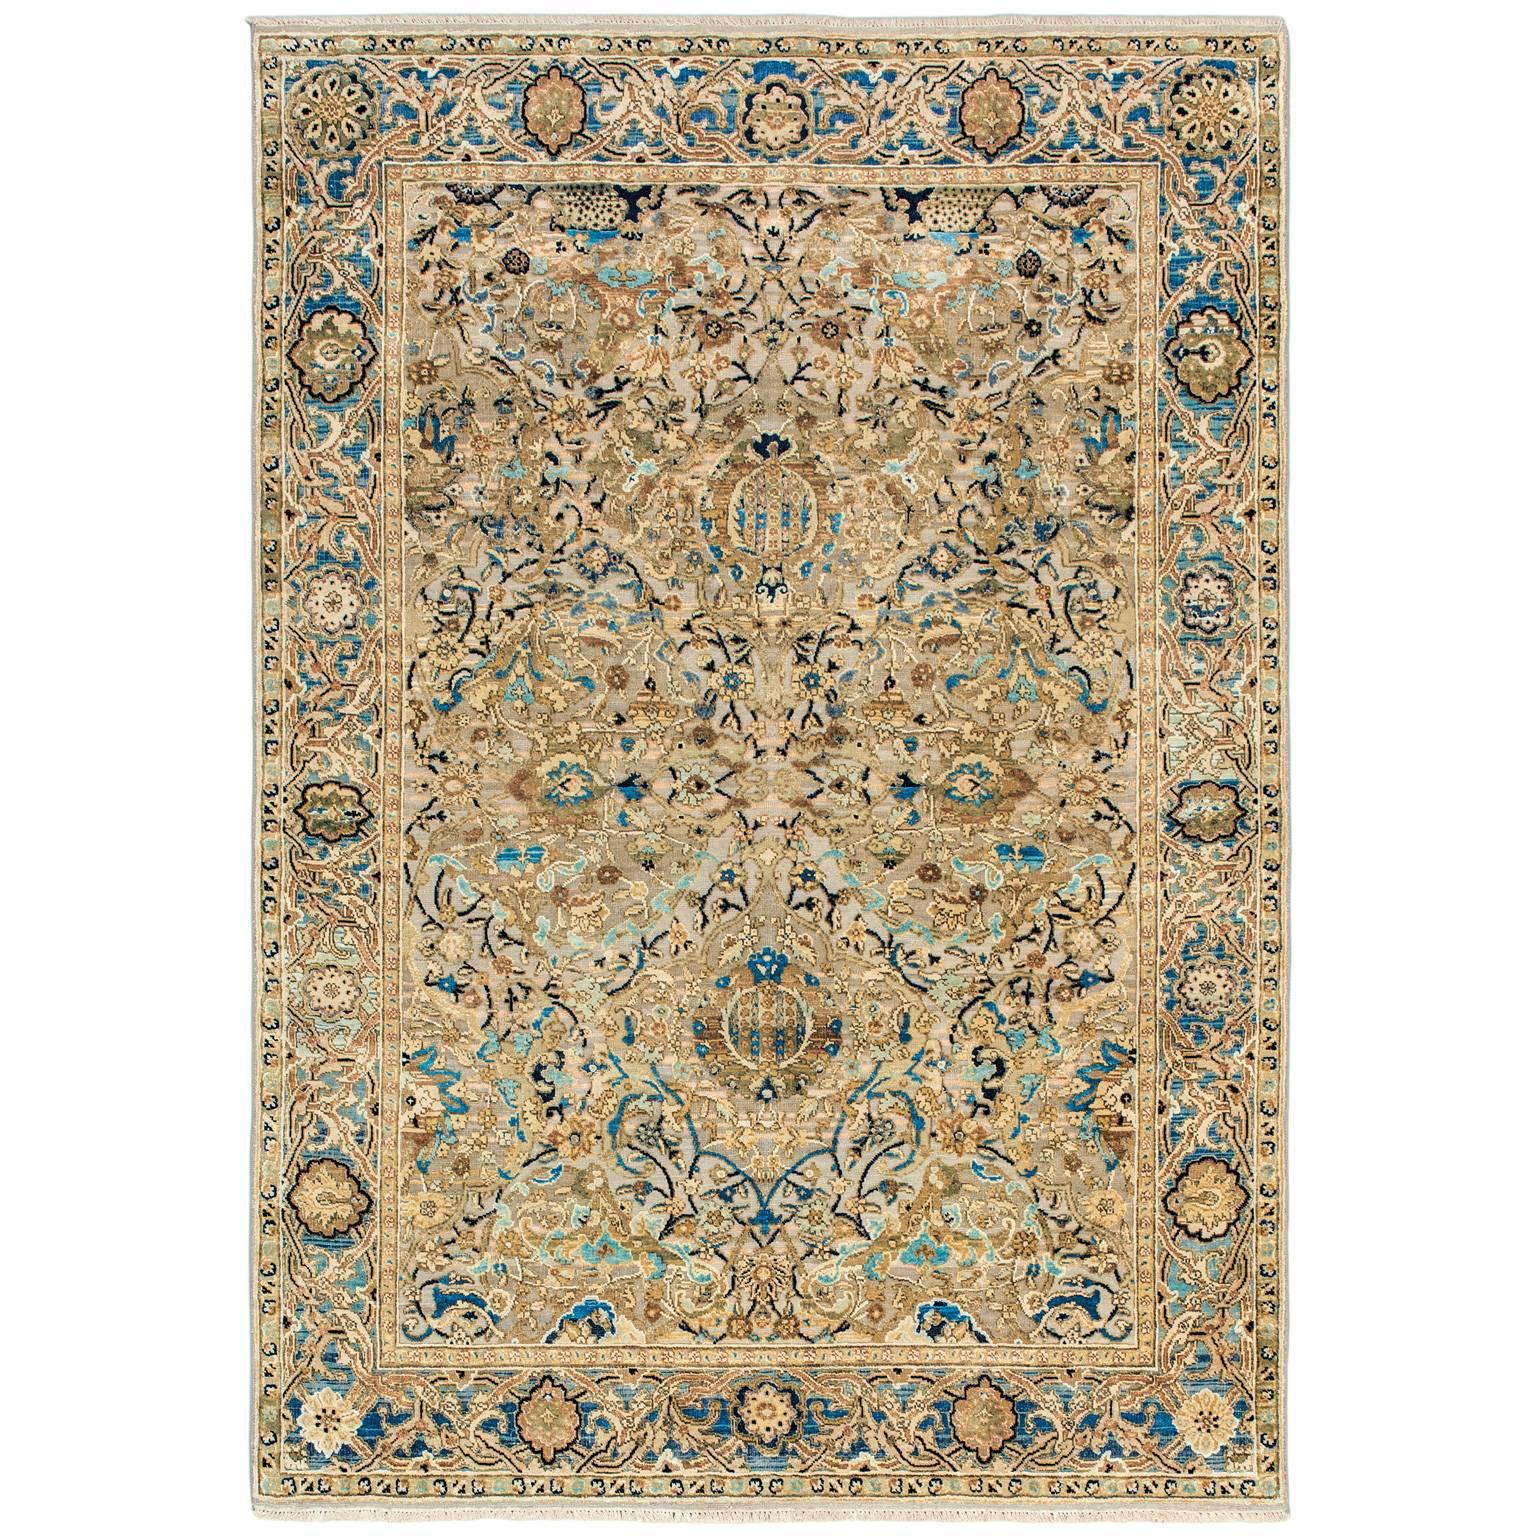 '17th Century Classic_Poloniase No.01' Wool and Silk Rug, Hand-Knotted in Jaipur For Sale